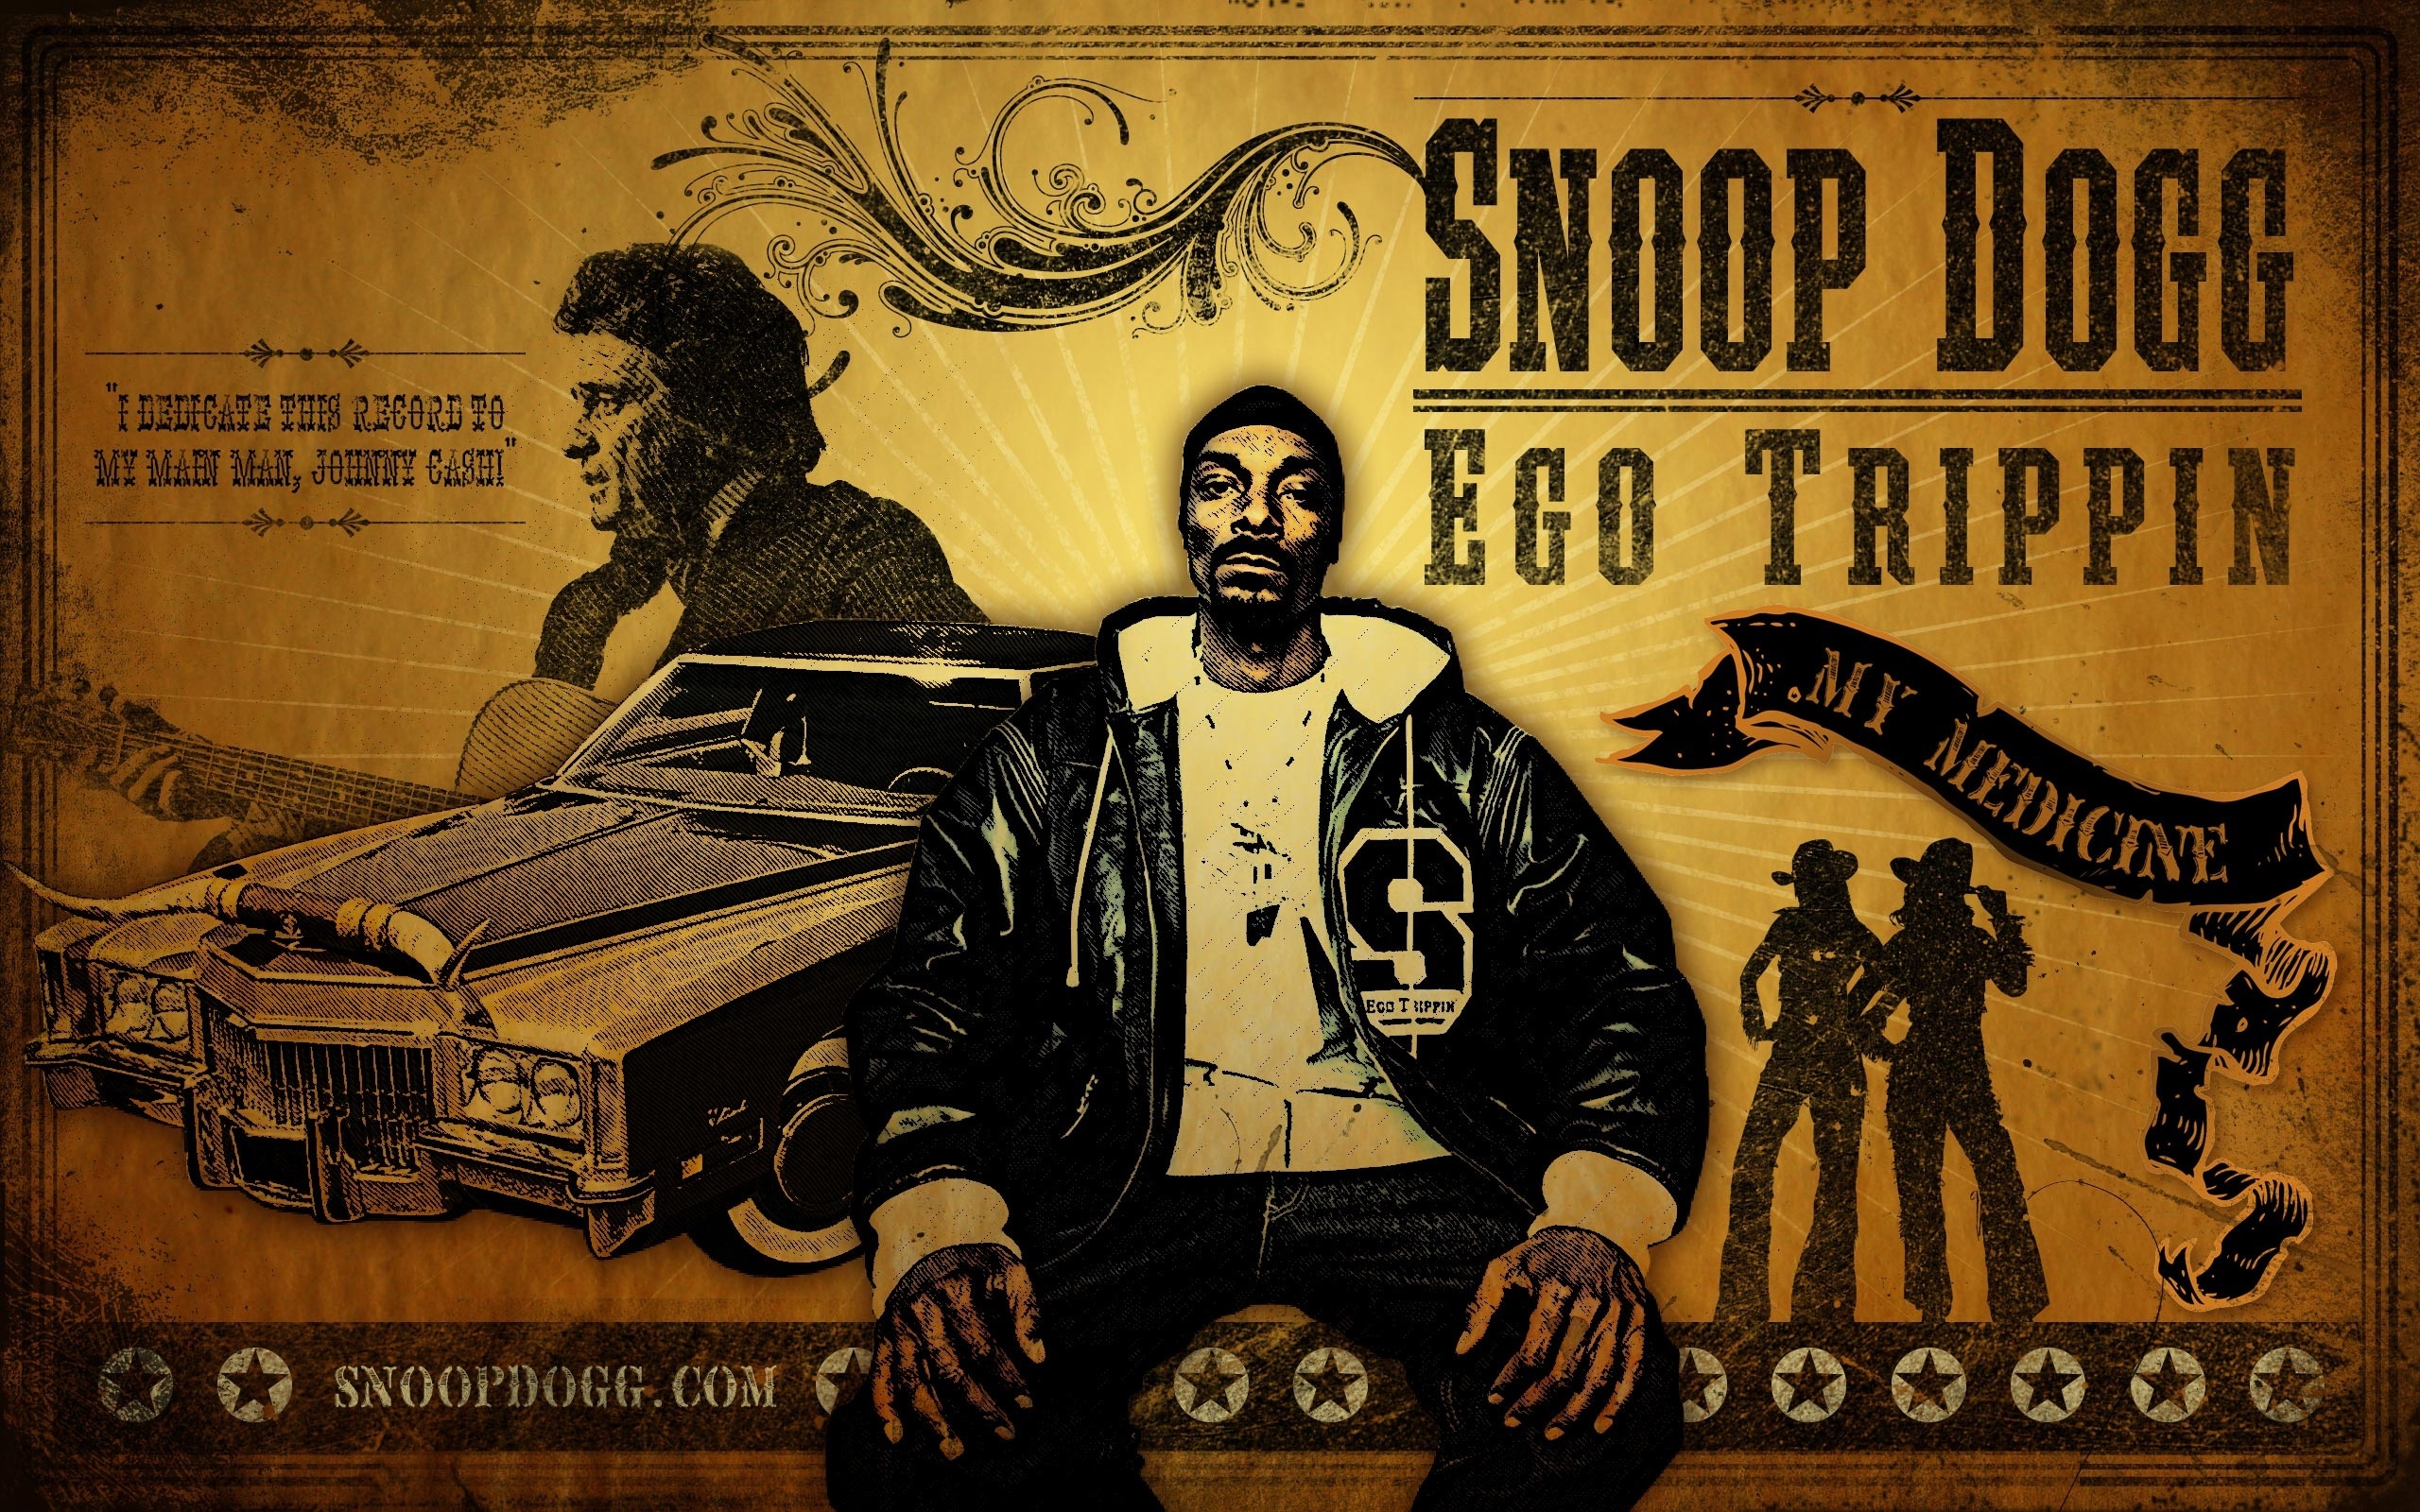 Wallpaper Old School Rappers Ice Cube Tupac Shakur Snoop Dogg Hip Hop  Music Background  Download Free Image